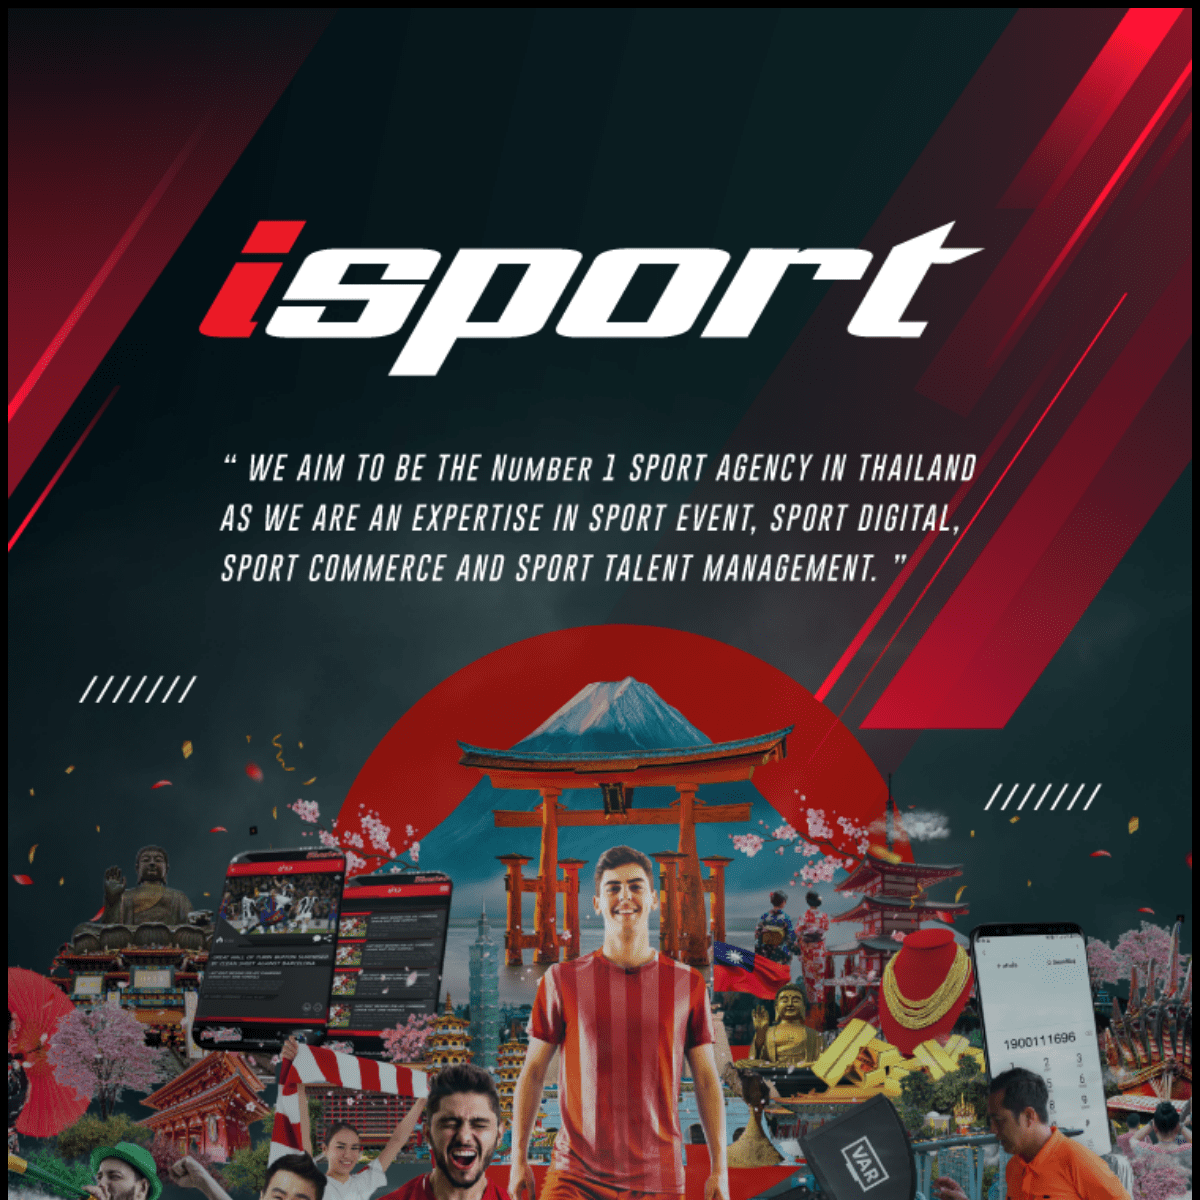 A complete backup of https://isport.co.th